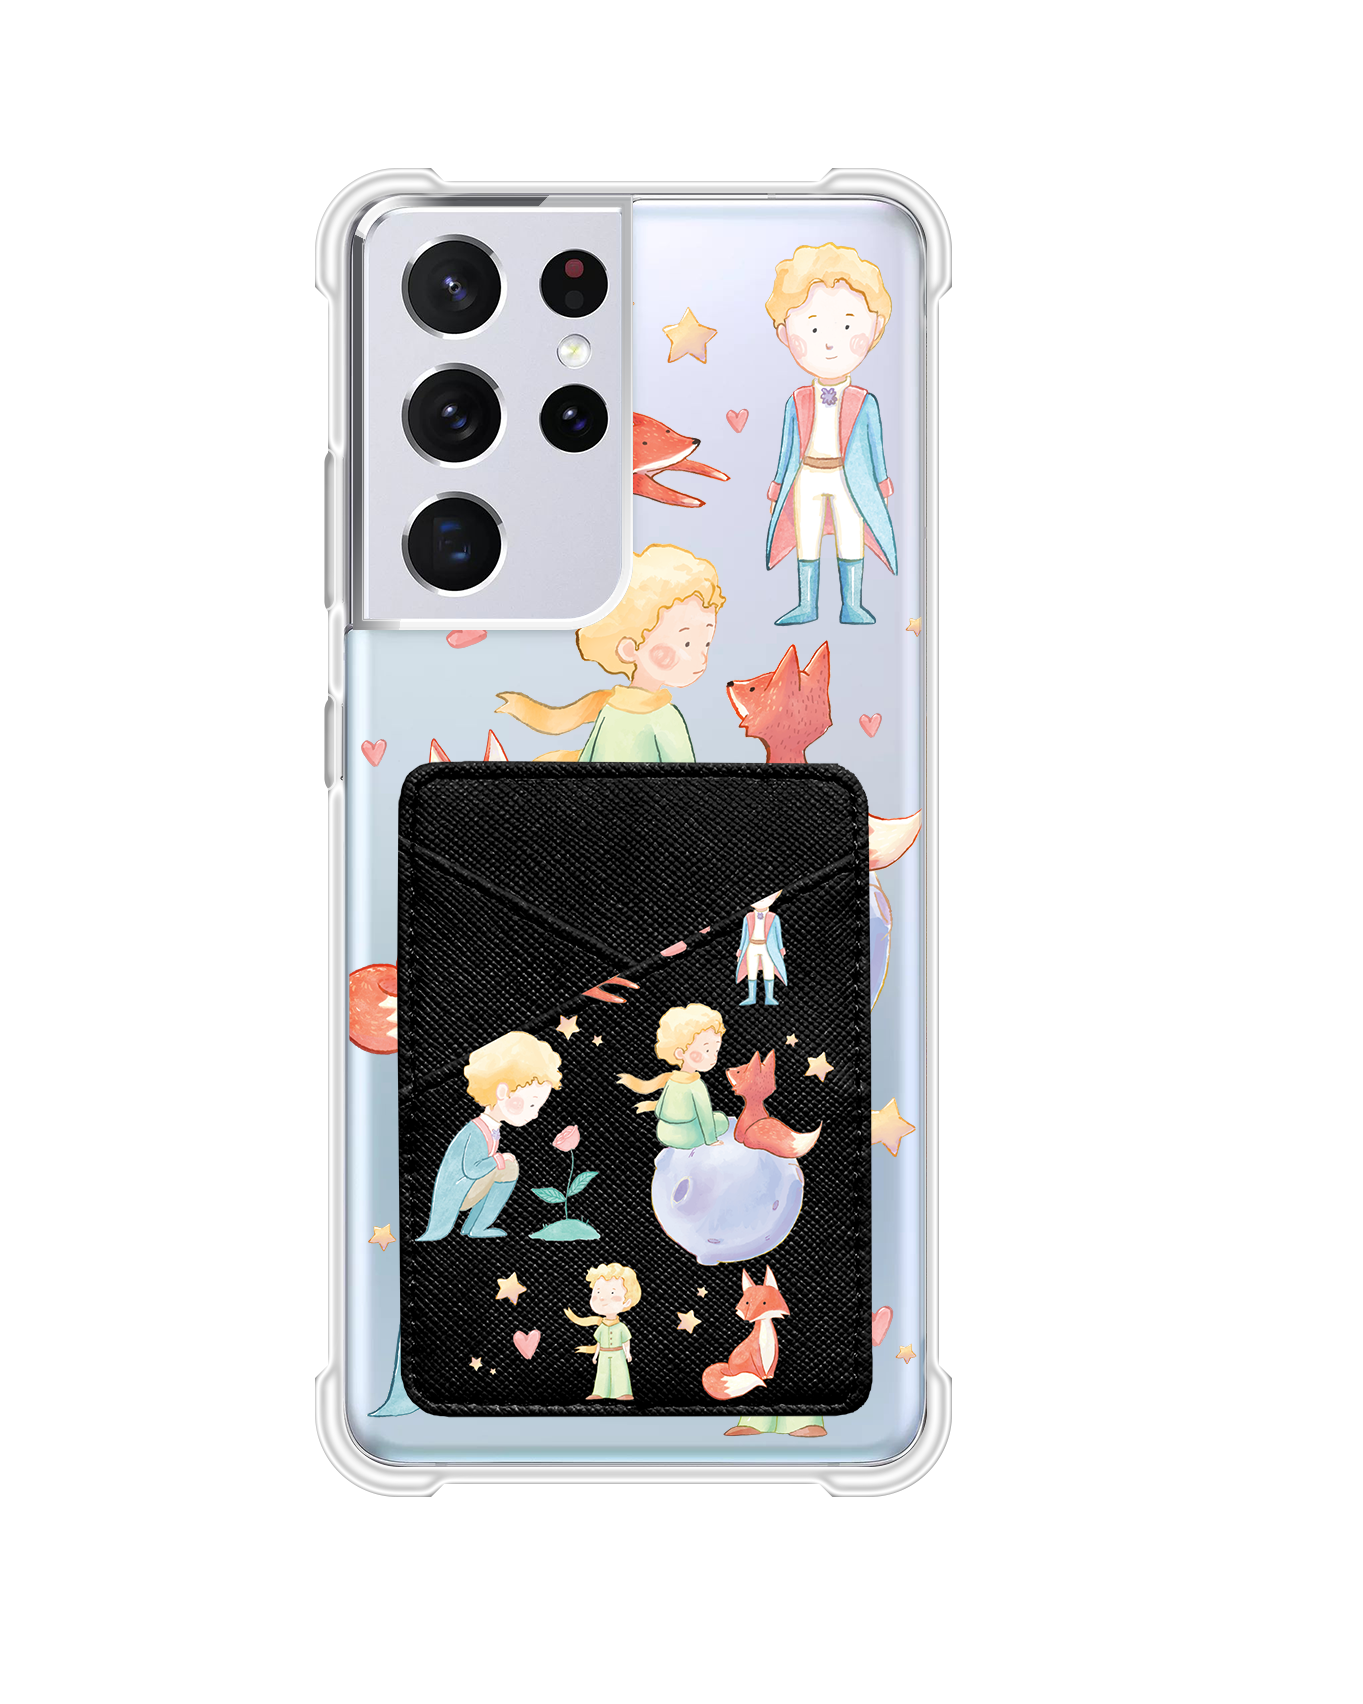 Android Phone Wallet Case - Little Prince & Fox